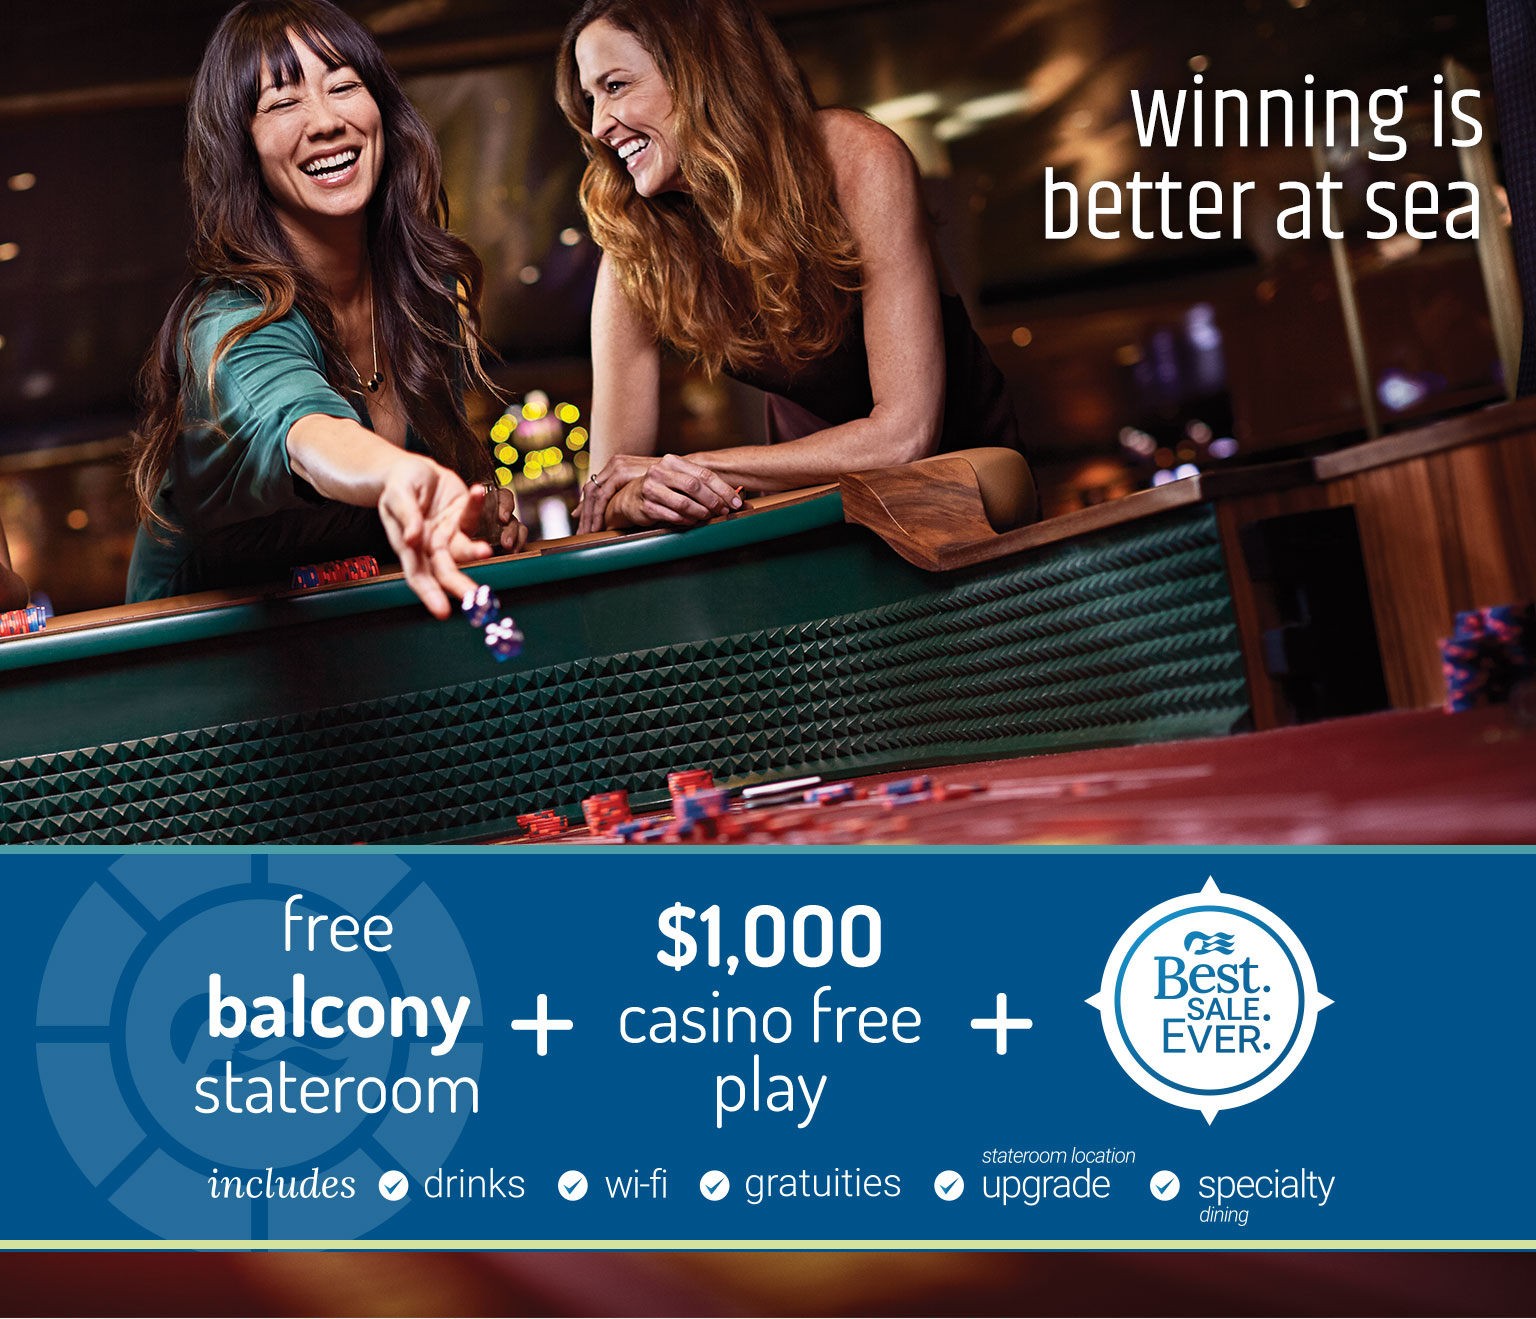 Winning is better as sea - free balcony stateroom + $1,000 casino free play + Best. Sale. Ever.